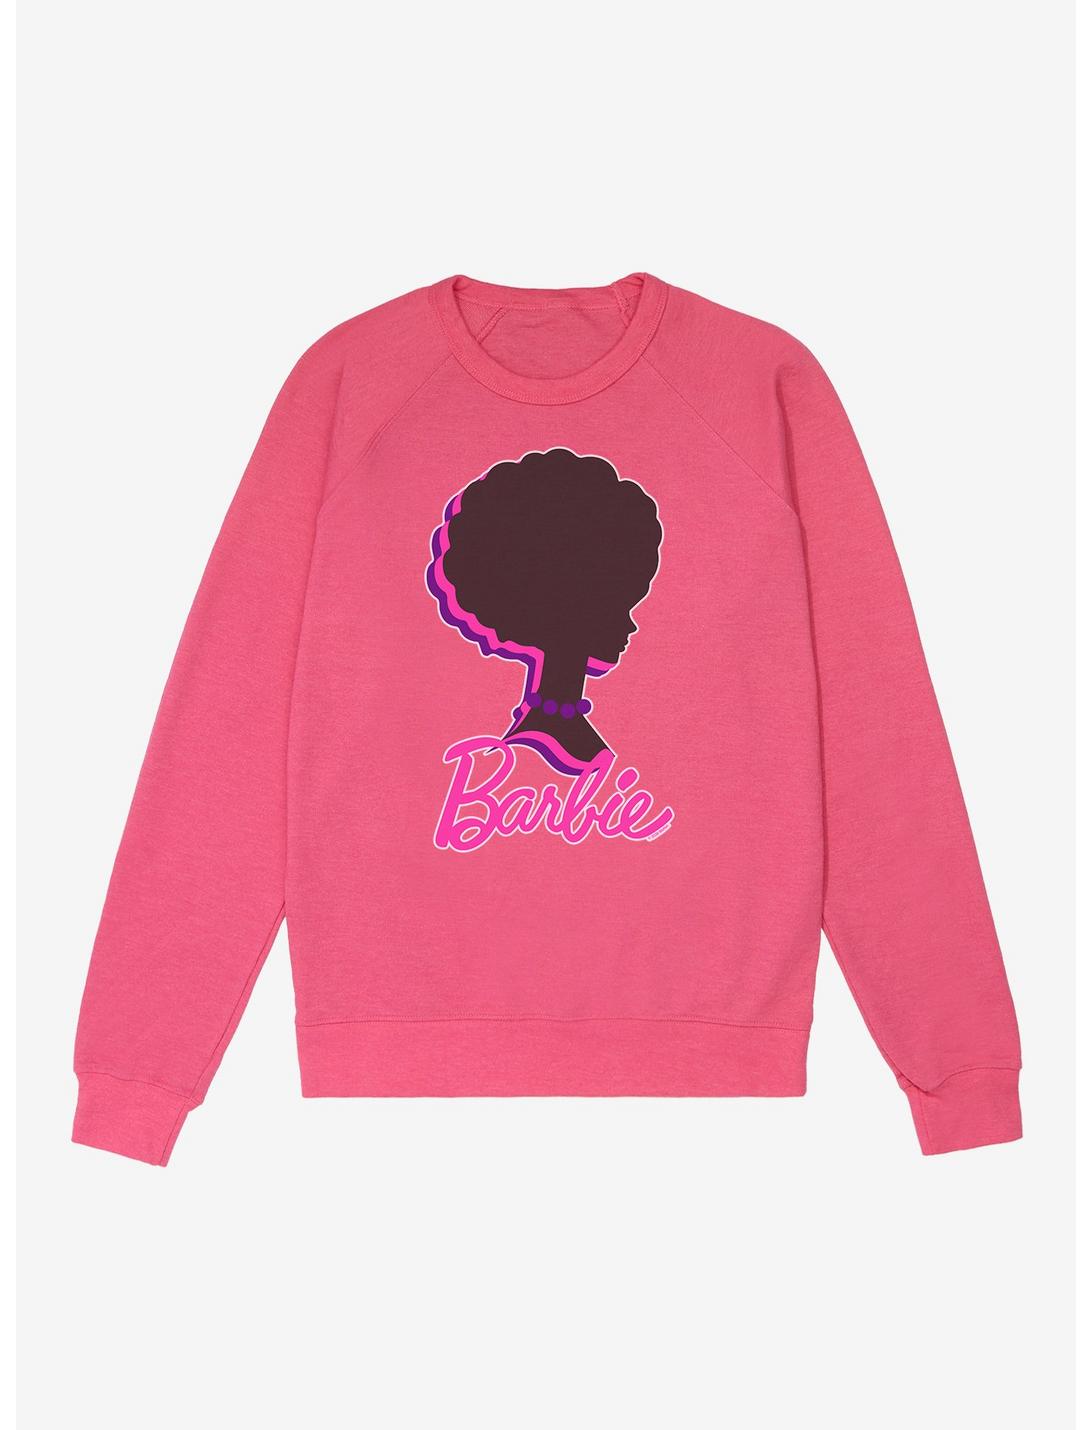 Barbie Afro Silhouette French Terry Sweatshirt, HELICONIA HEATHER, hi-res